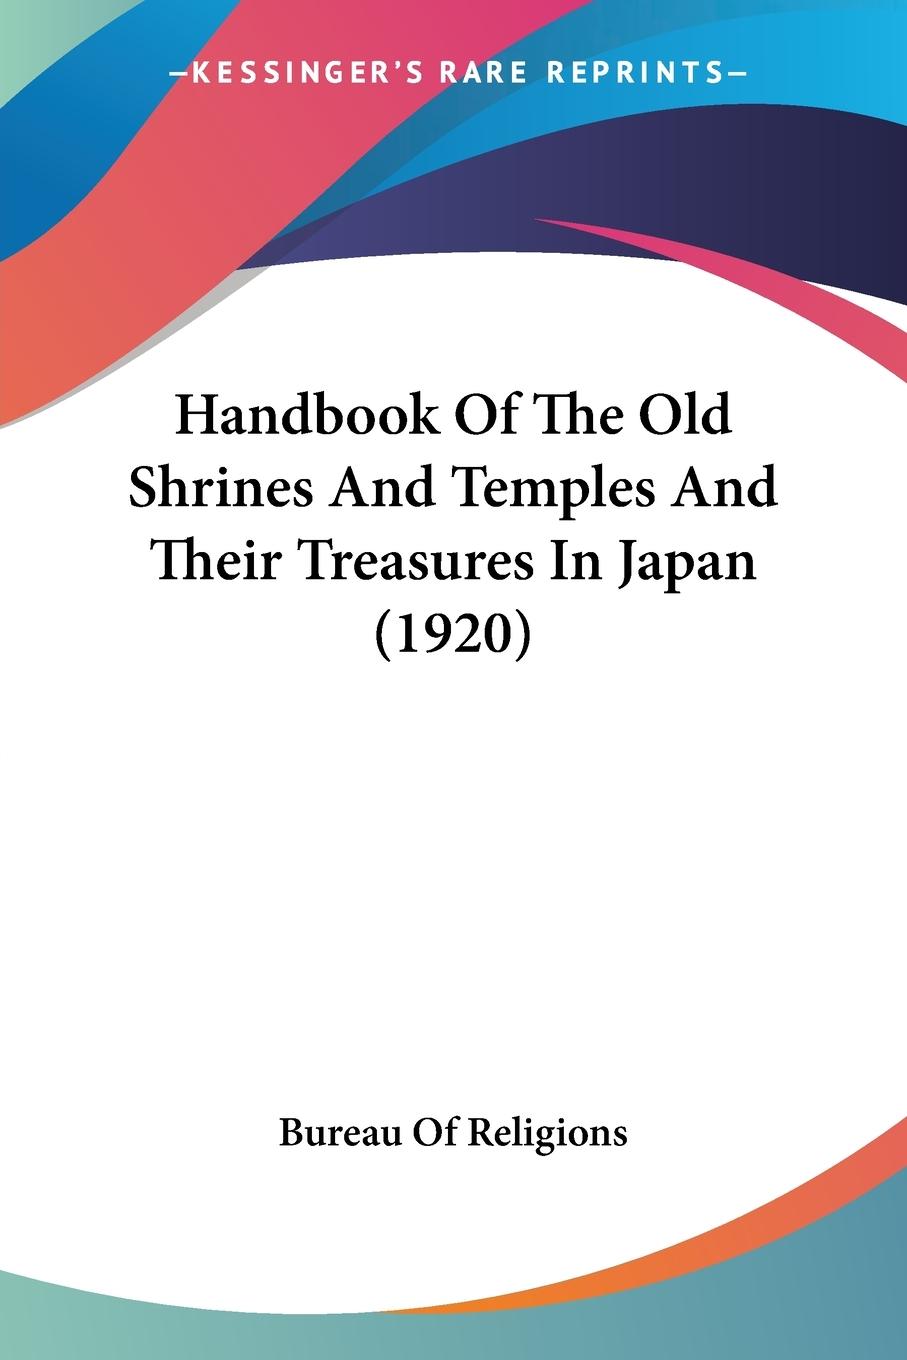 Handbook Of The Old Shrines And Temples And Their Treasures In Japan (1920) - Bureau Of Religions